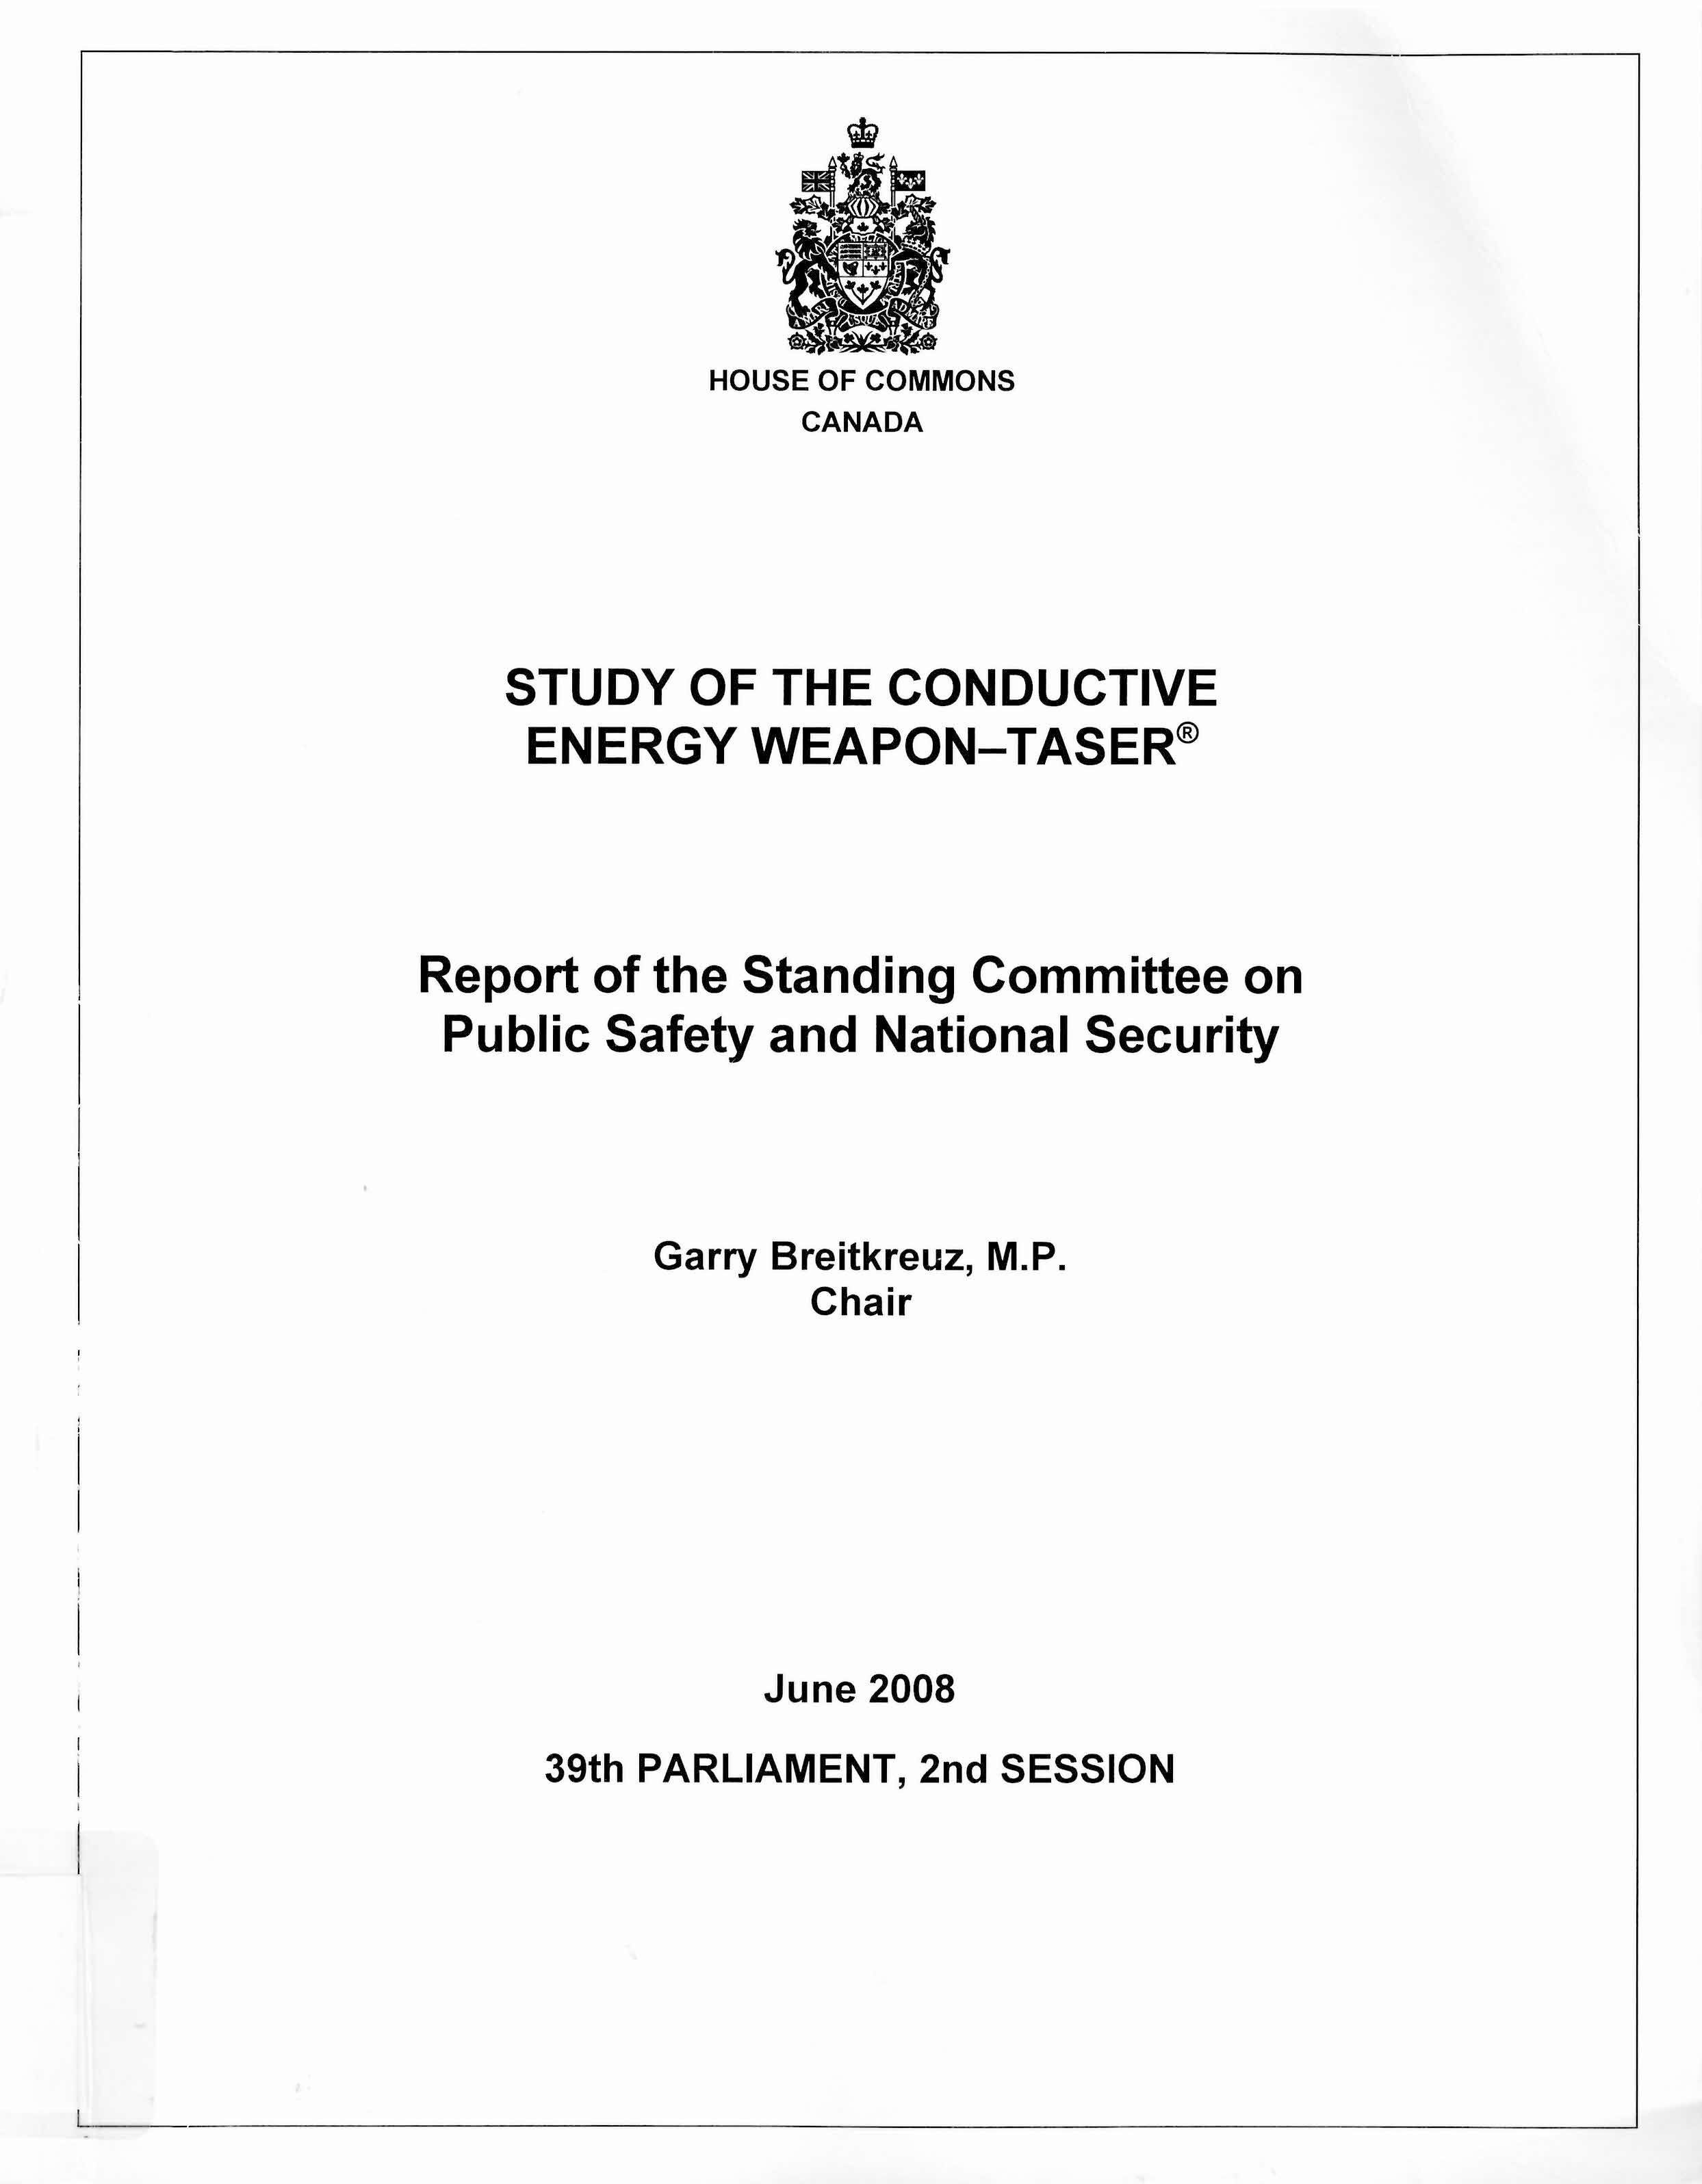 Study of the conductive energy weapon-Taser : report of the Standing Committee on Public Safety and National Security